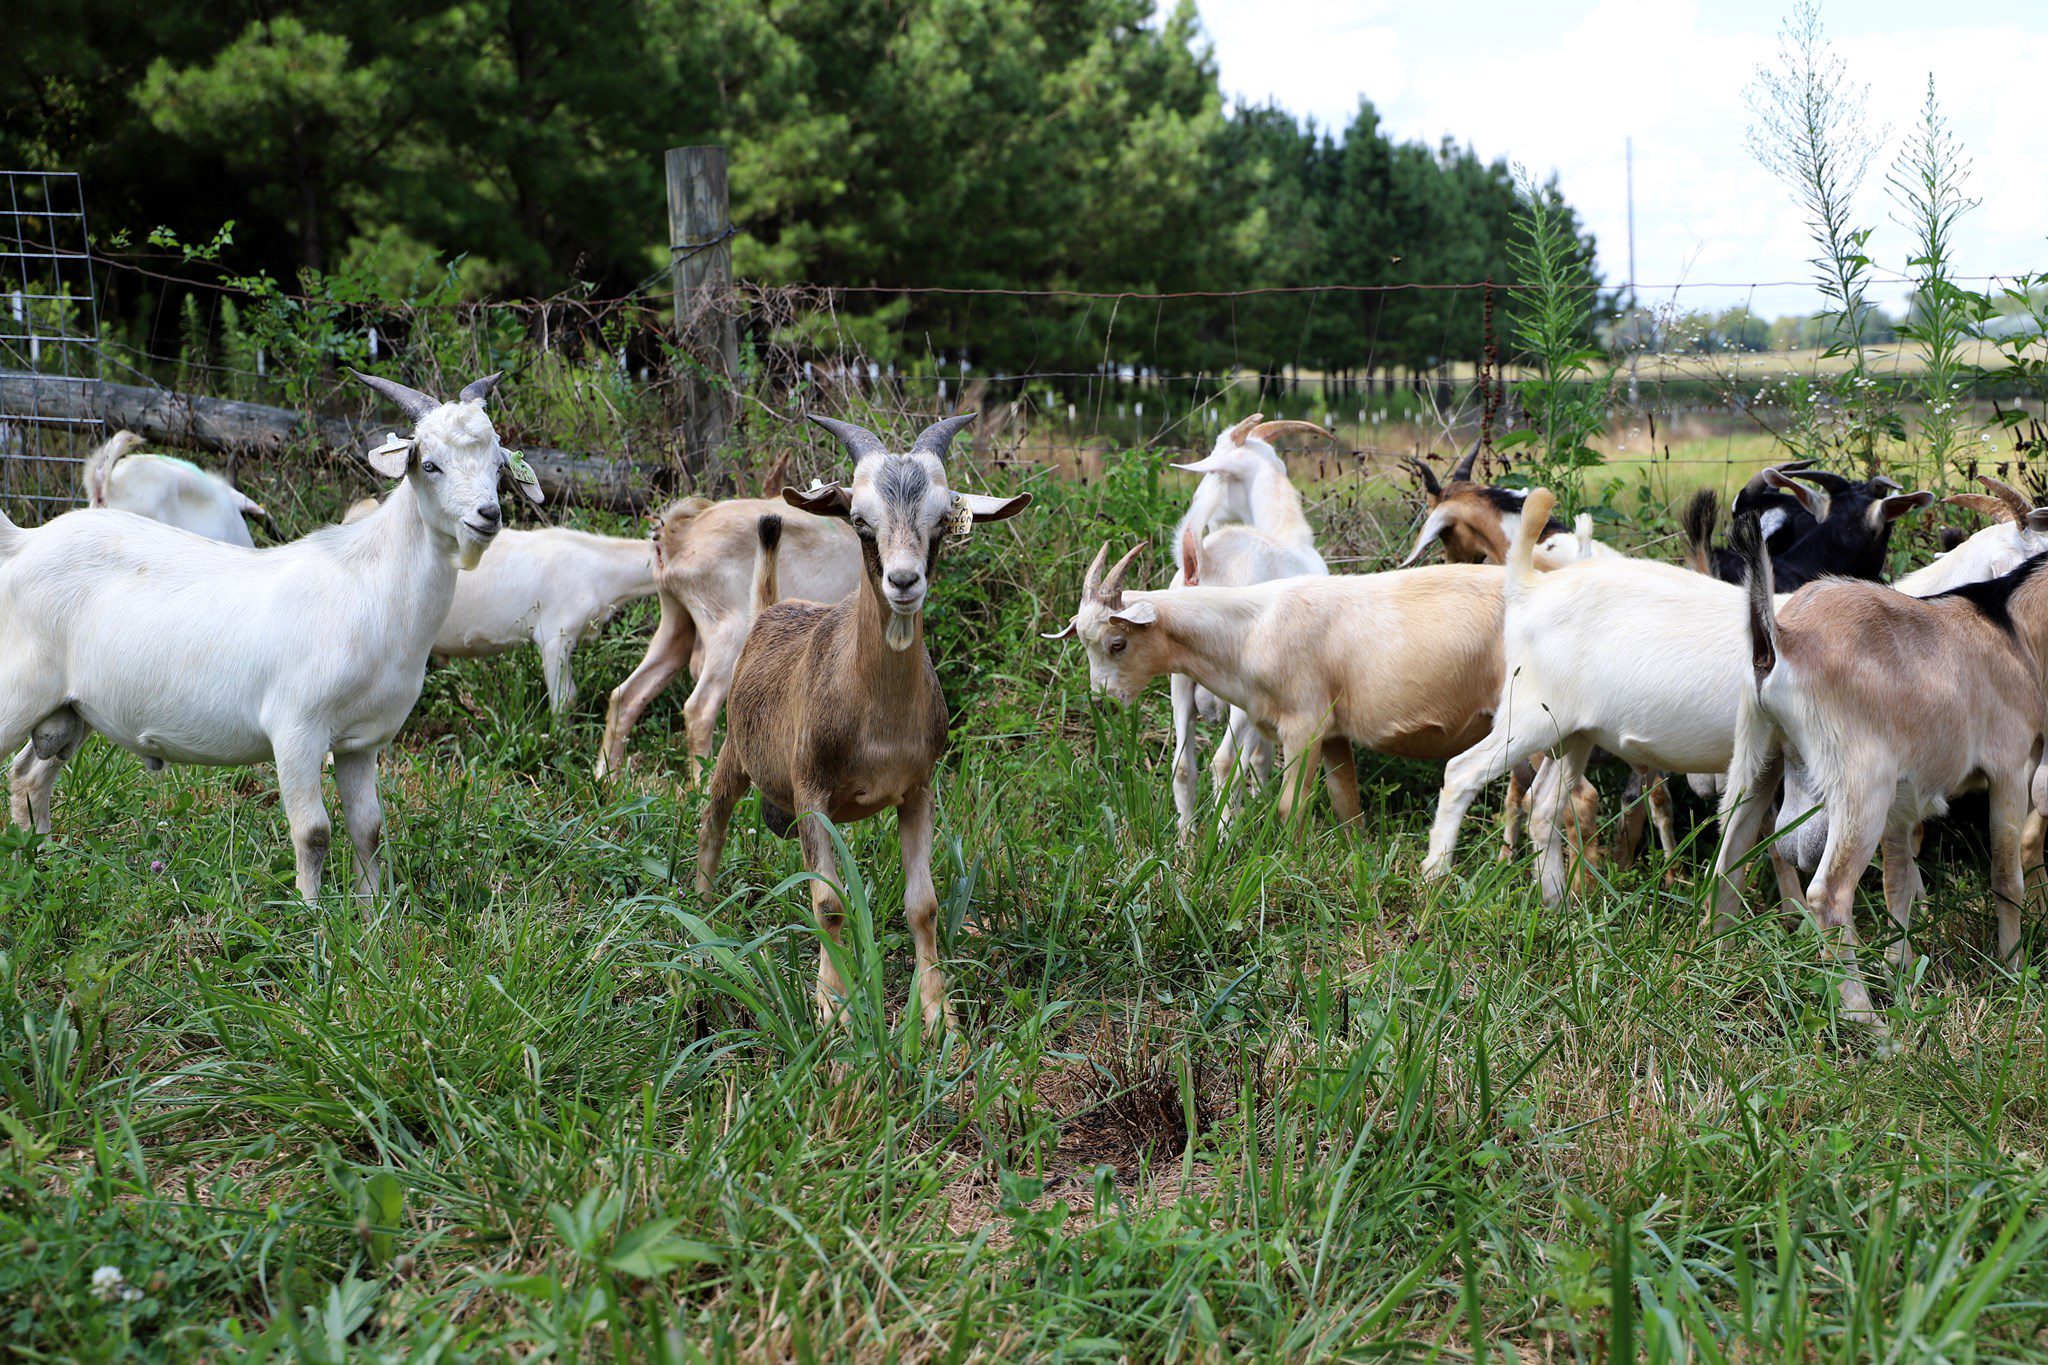 Ten goats in a grassy pasture.